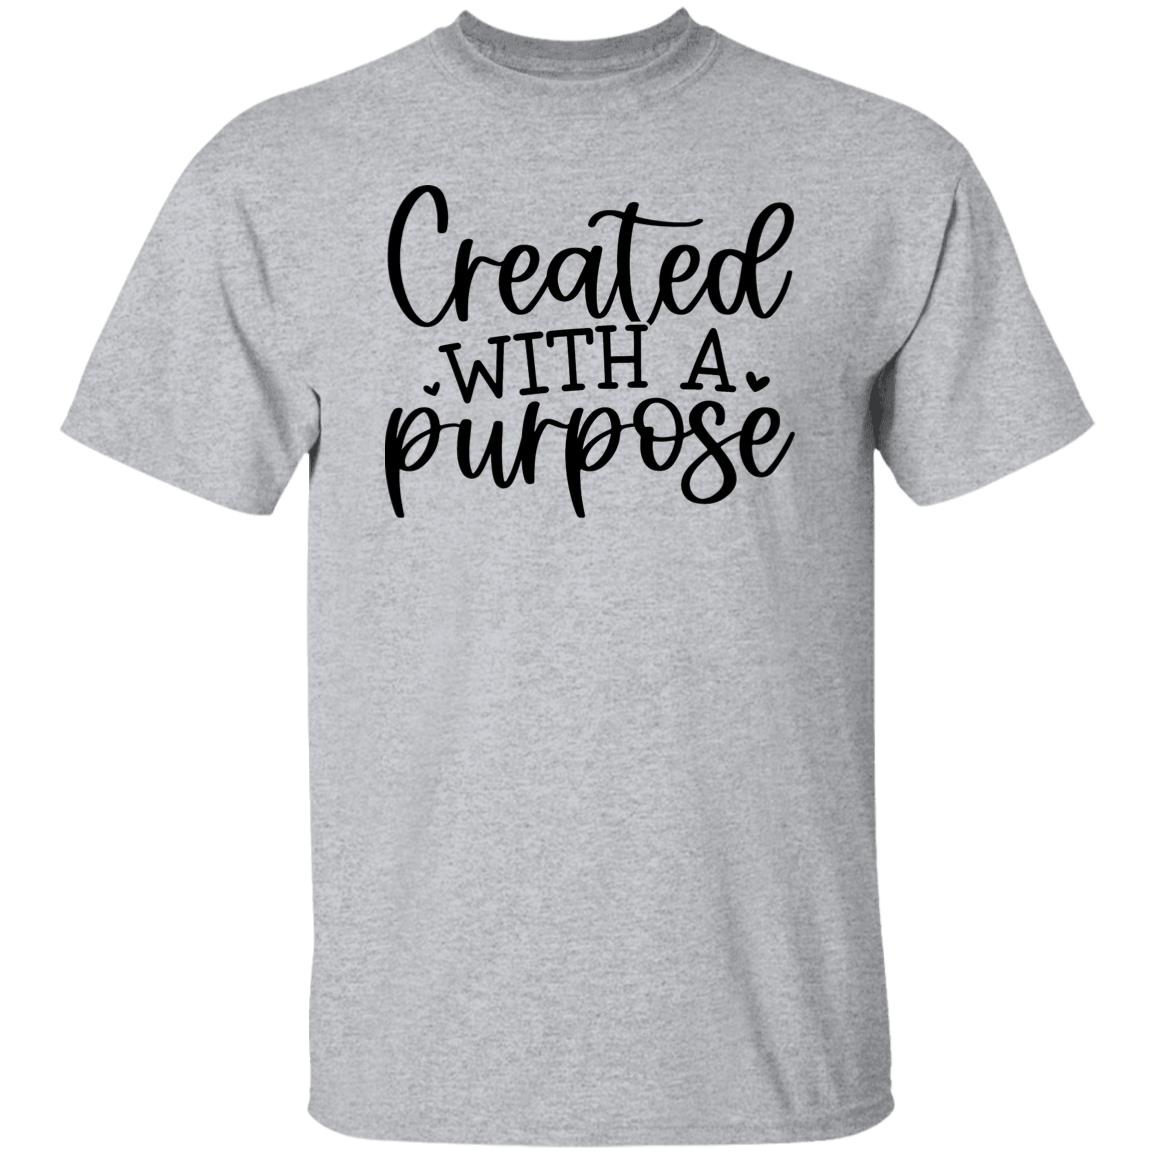 Created with a purpose